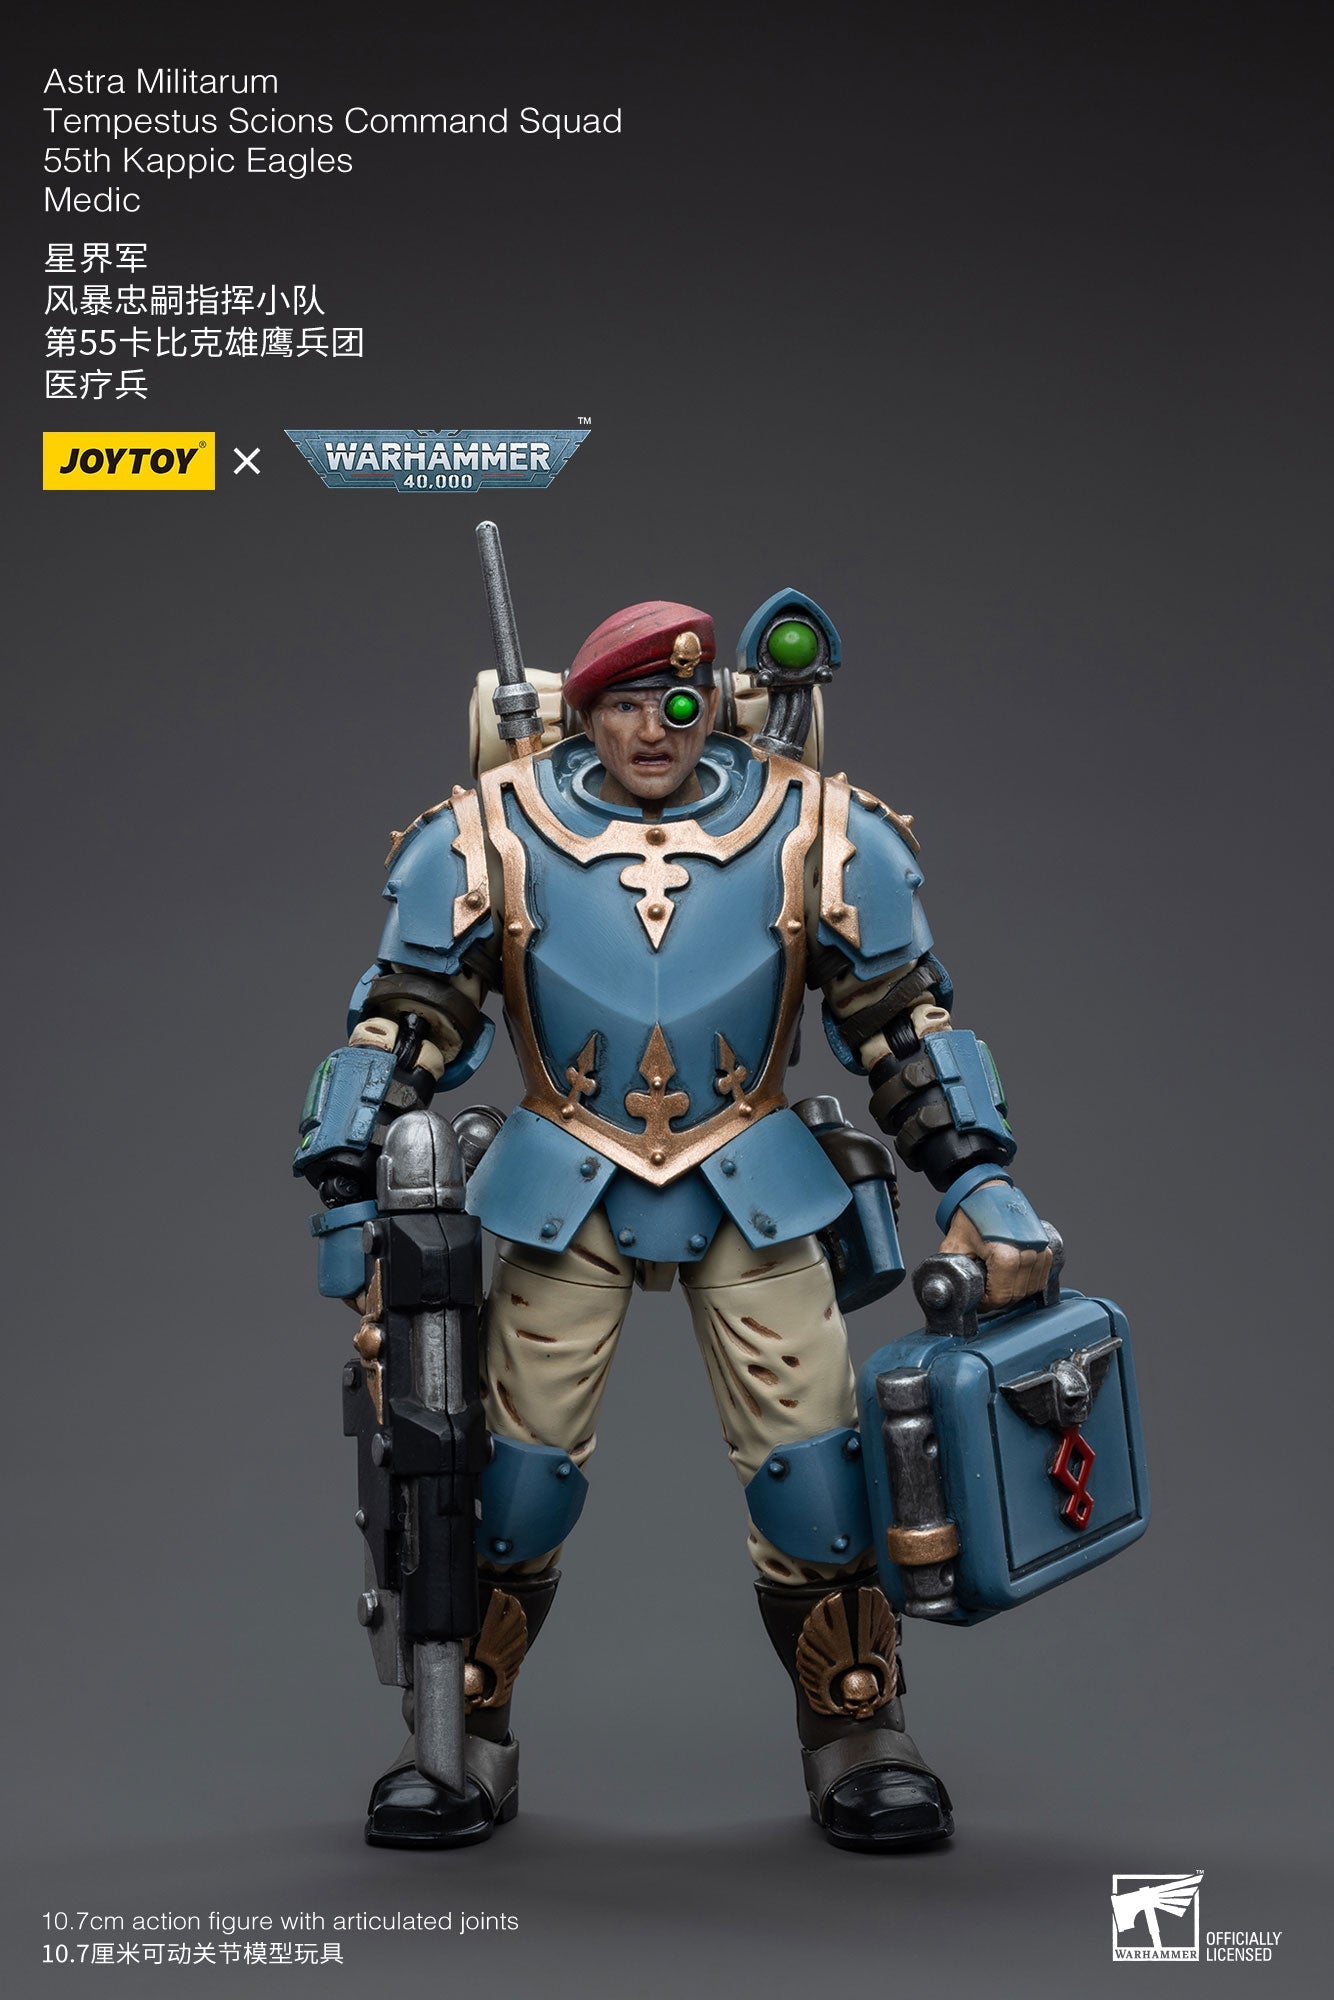 Astra Militarum Tempestus Scions Command Squad 55th Kappic Eagles Medic - Warhammer 40K Action Figure By JOYTOY